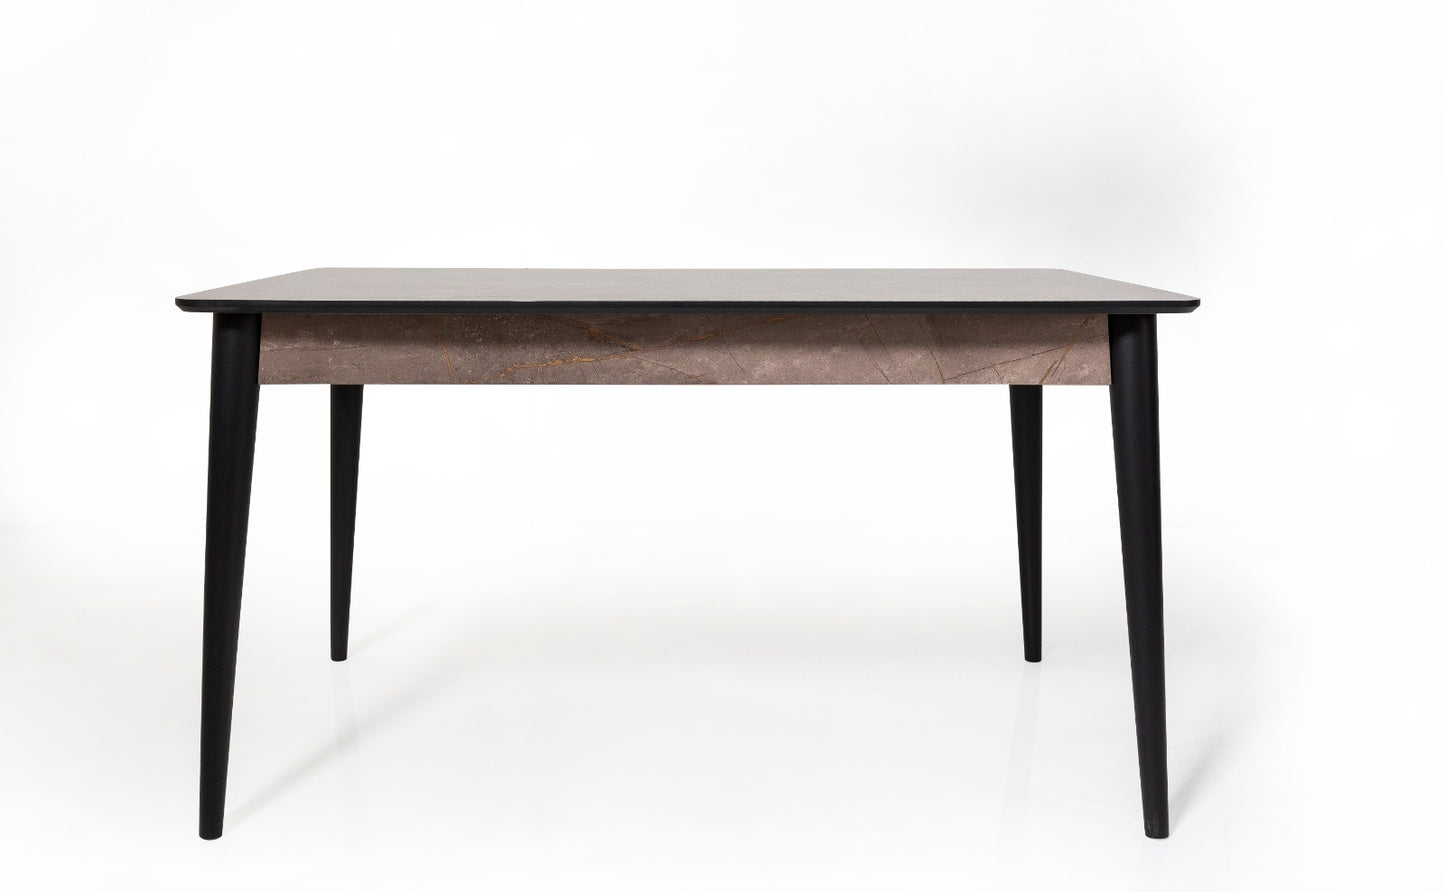 55" Modern Dining Table Rectangular Top with Solid Wood Legs